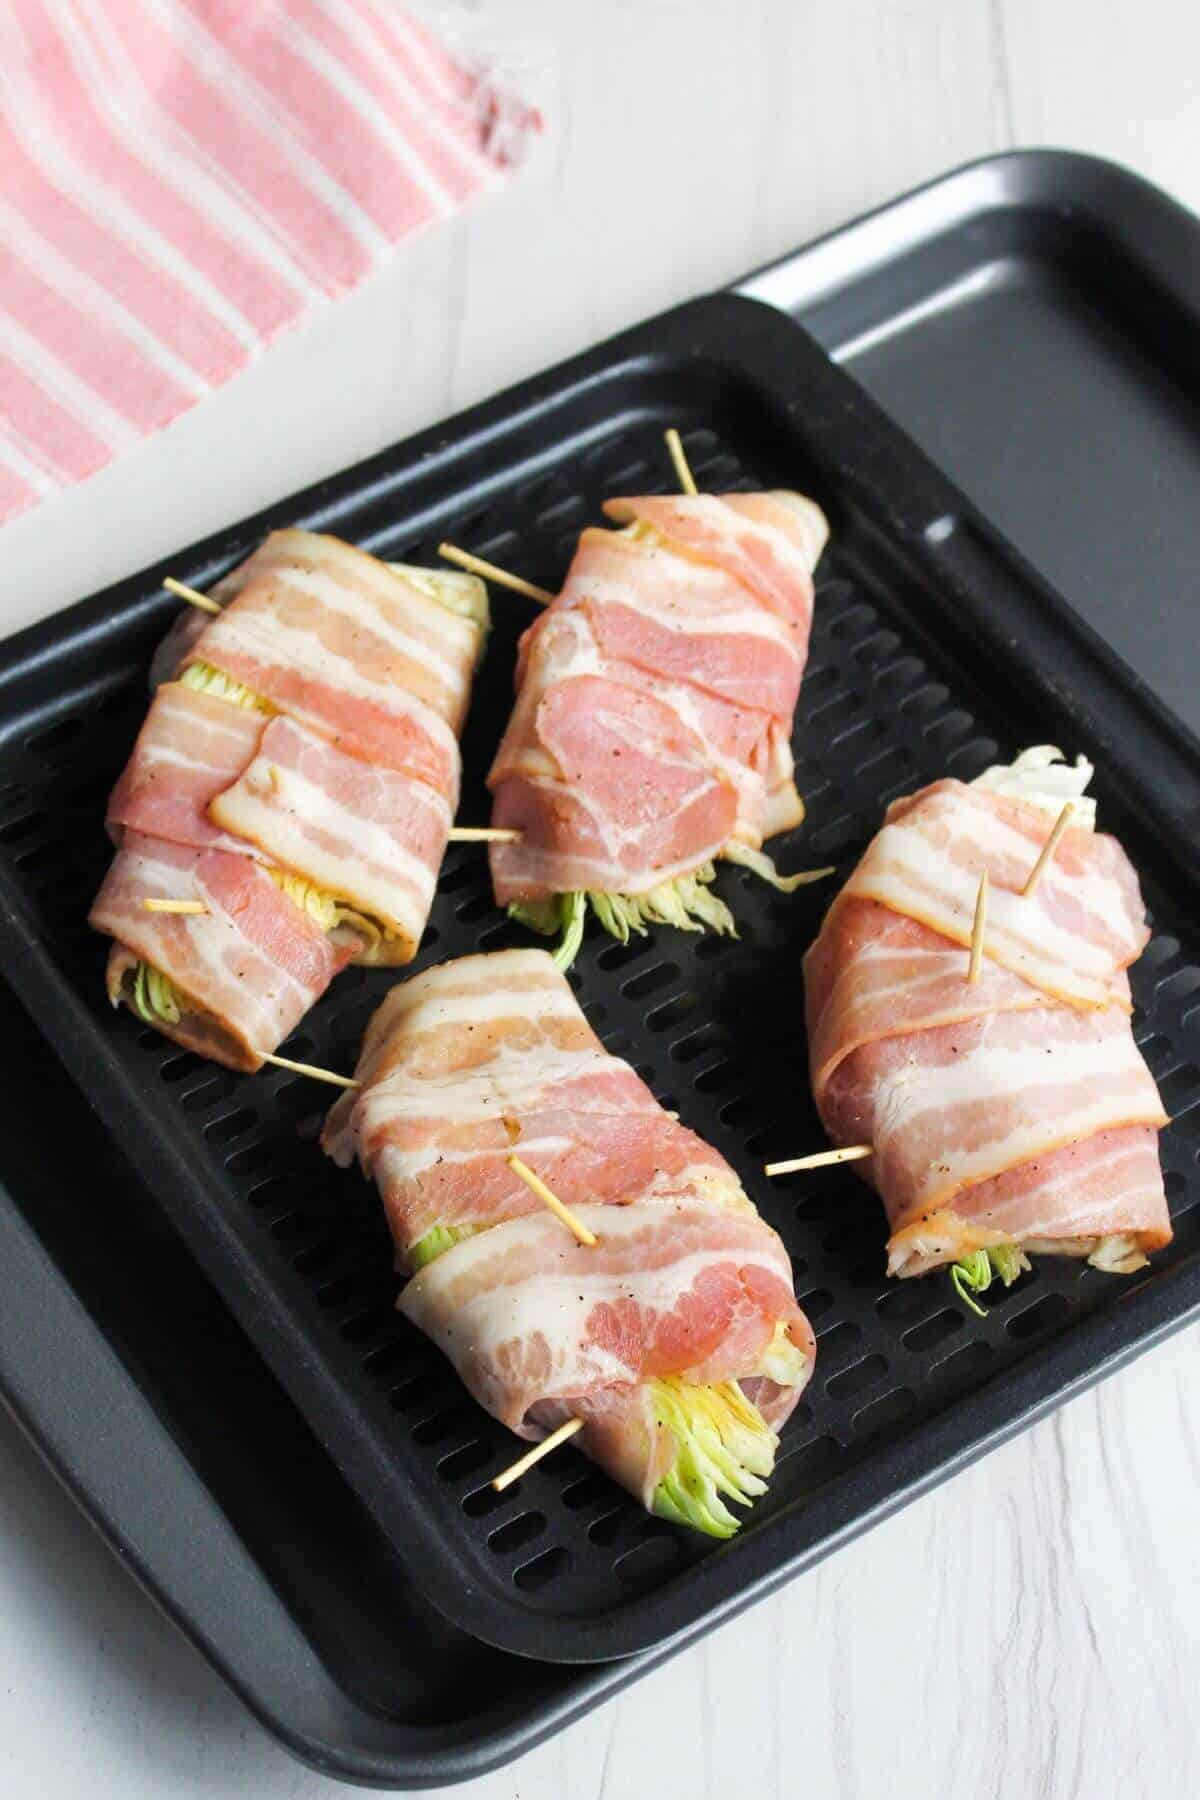 Bacon wrapped cabbage wedges on air fryer tray.